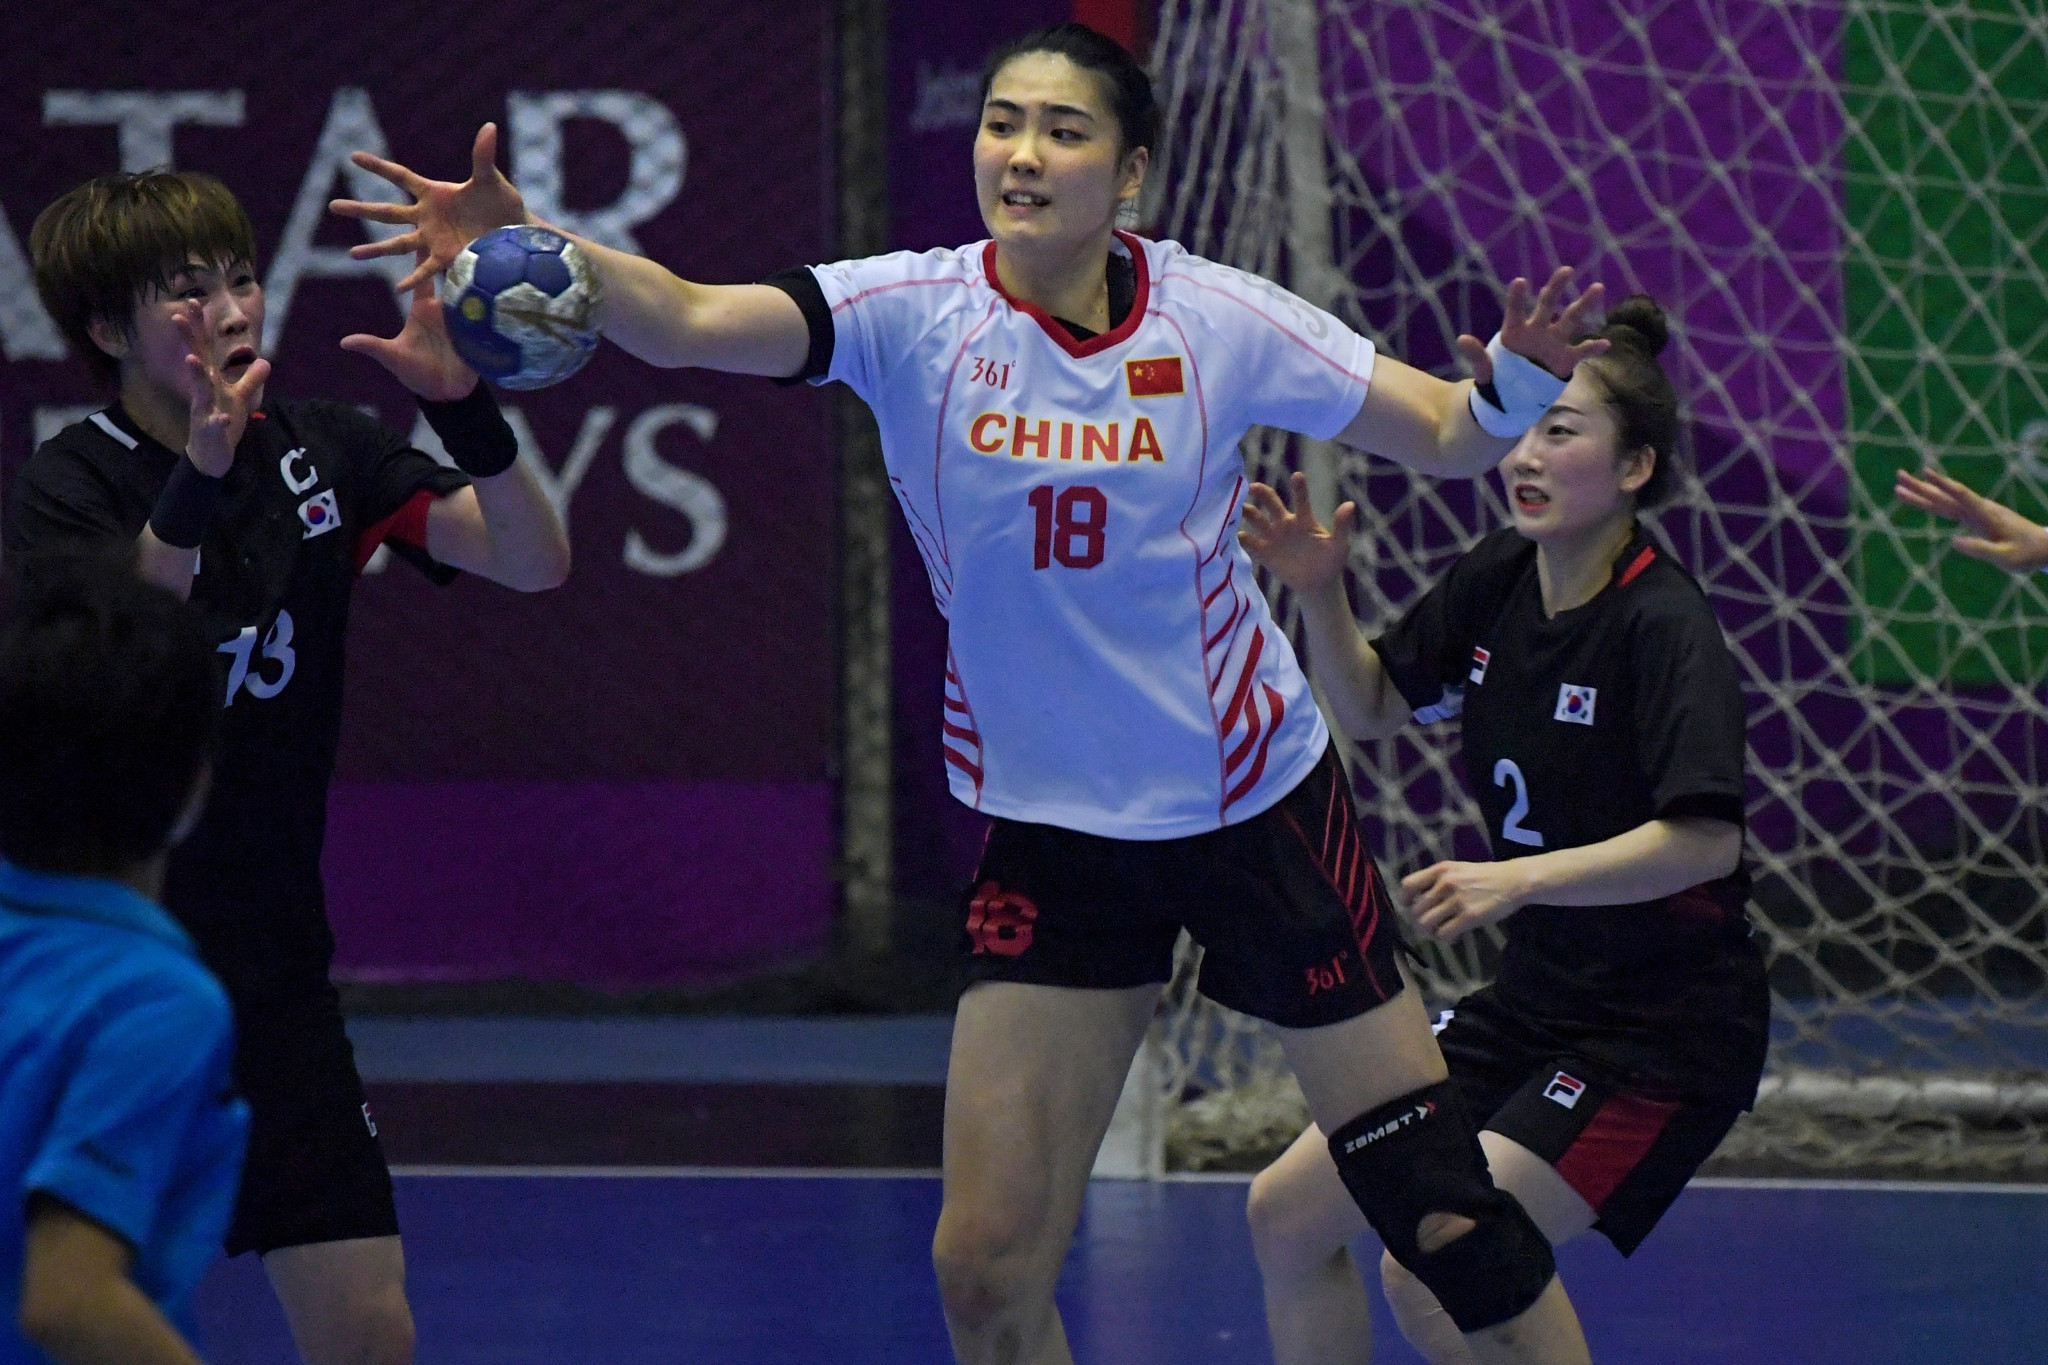 China may launch a joint bid with Russia to host the World Women's Handball Championship in either 2029 or 2031 ©Getty Images